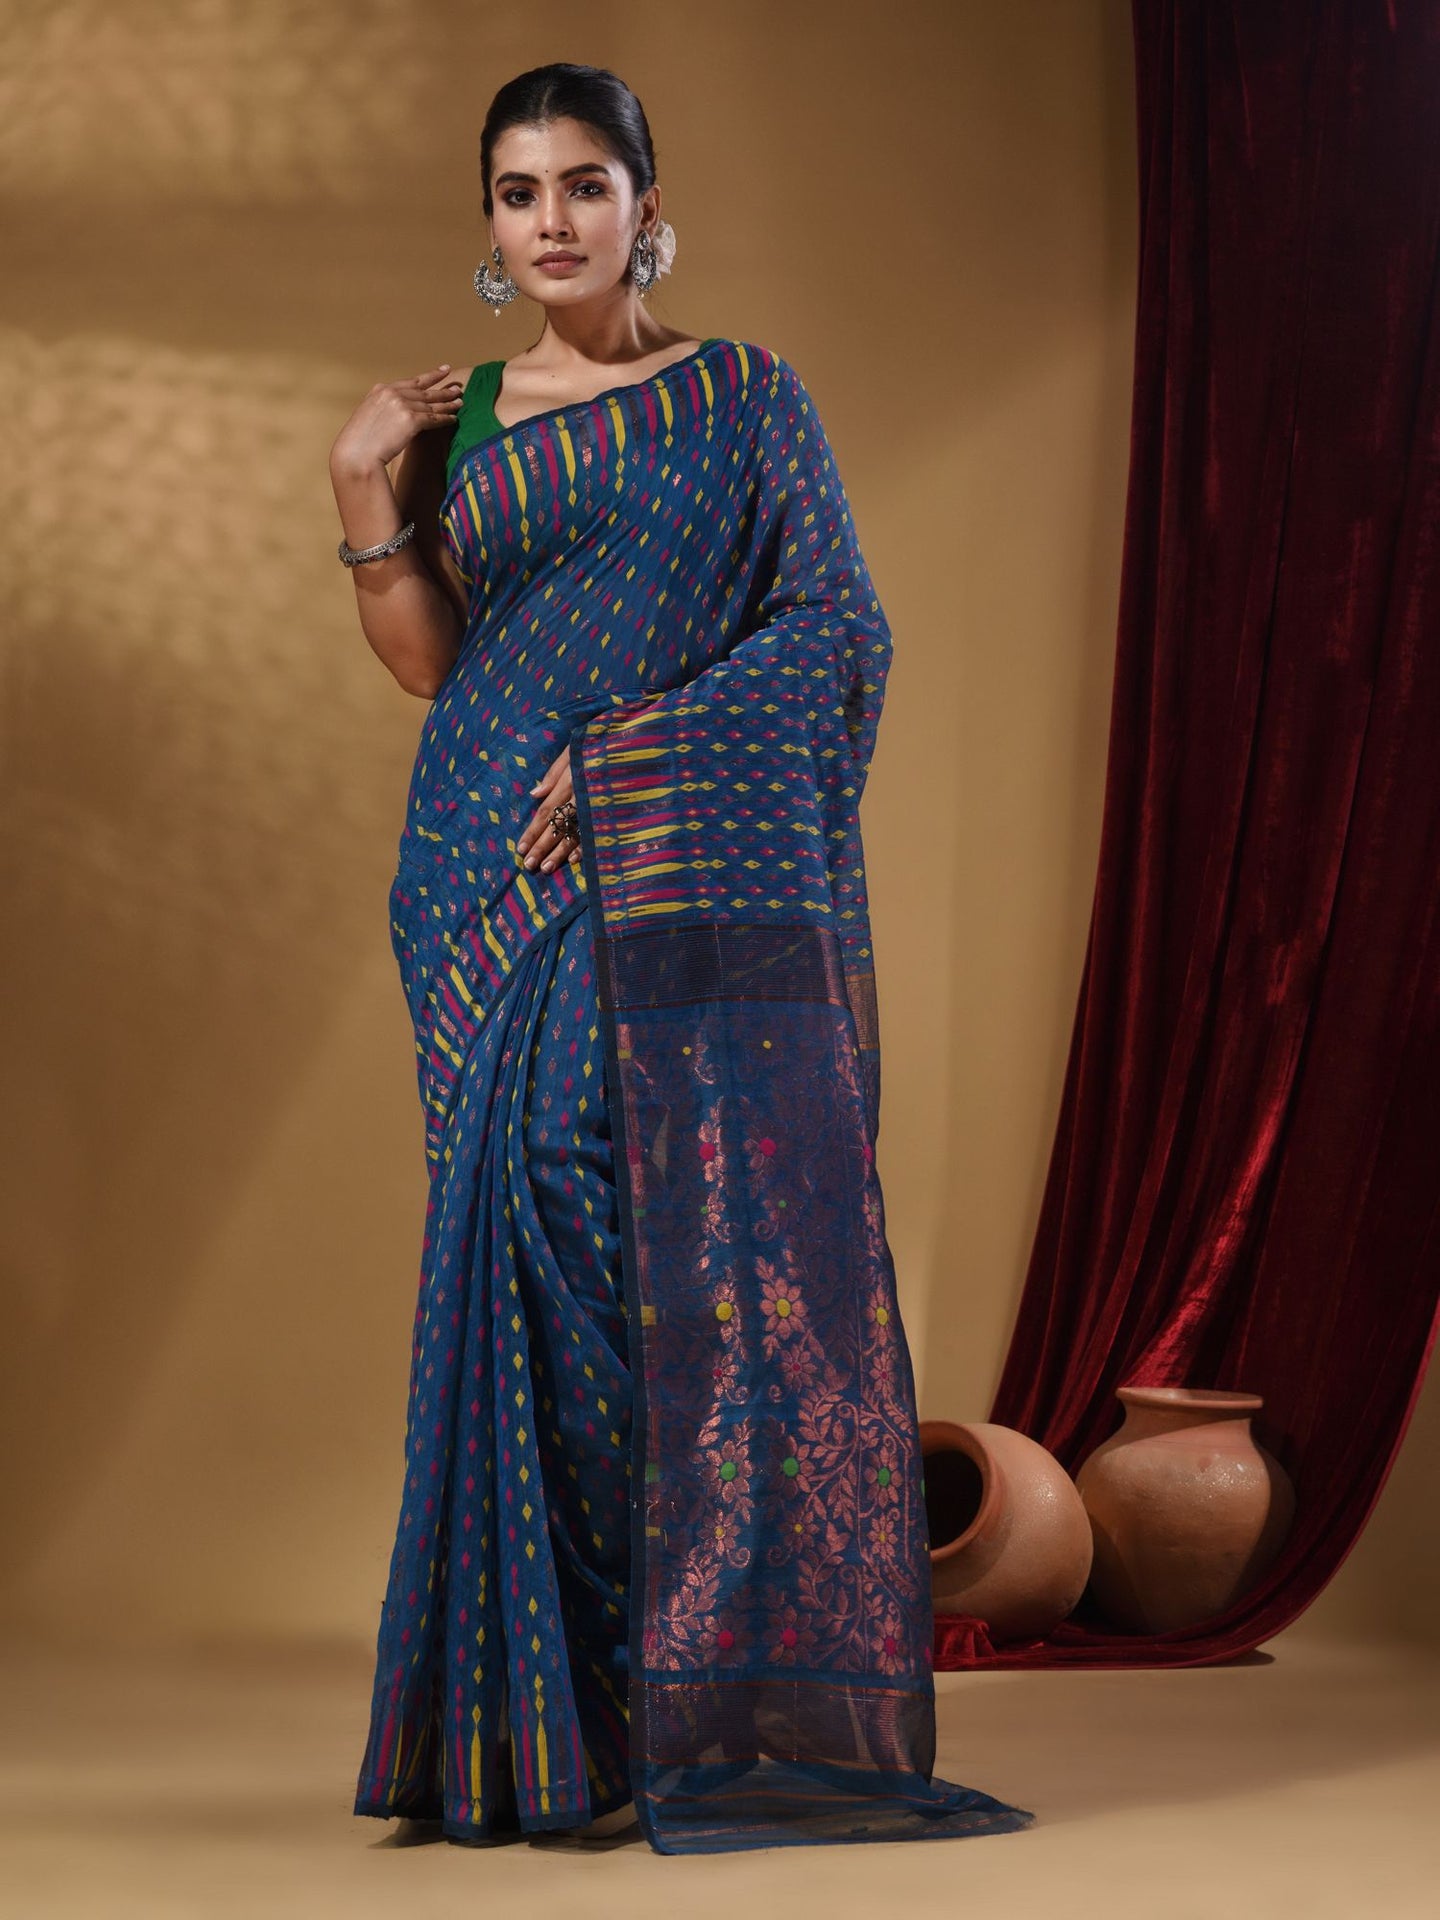 Azure Blue Cotton Handwoven Jamdani Saree With Woven Buttas And Floral Designs